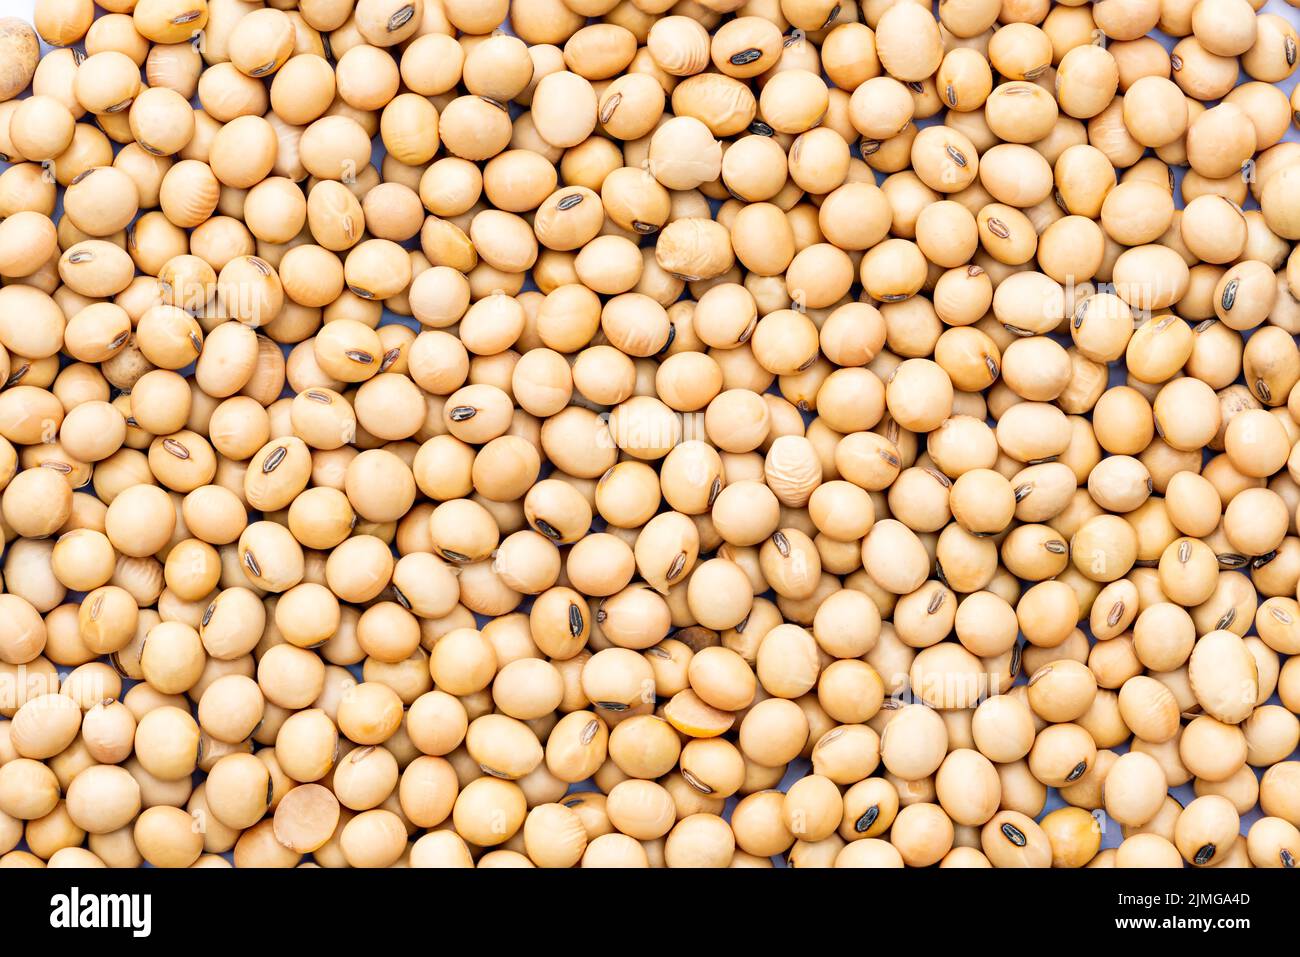 Top view of soy bean background. Stock Photo